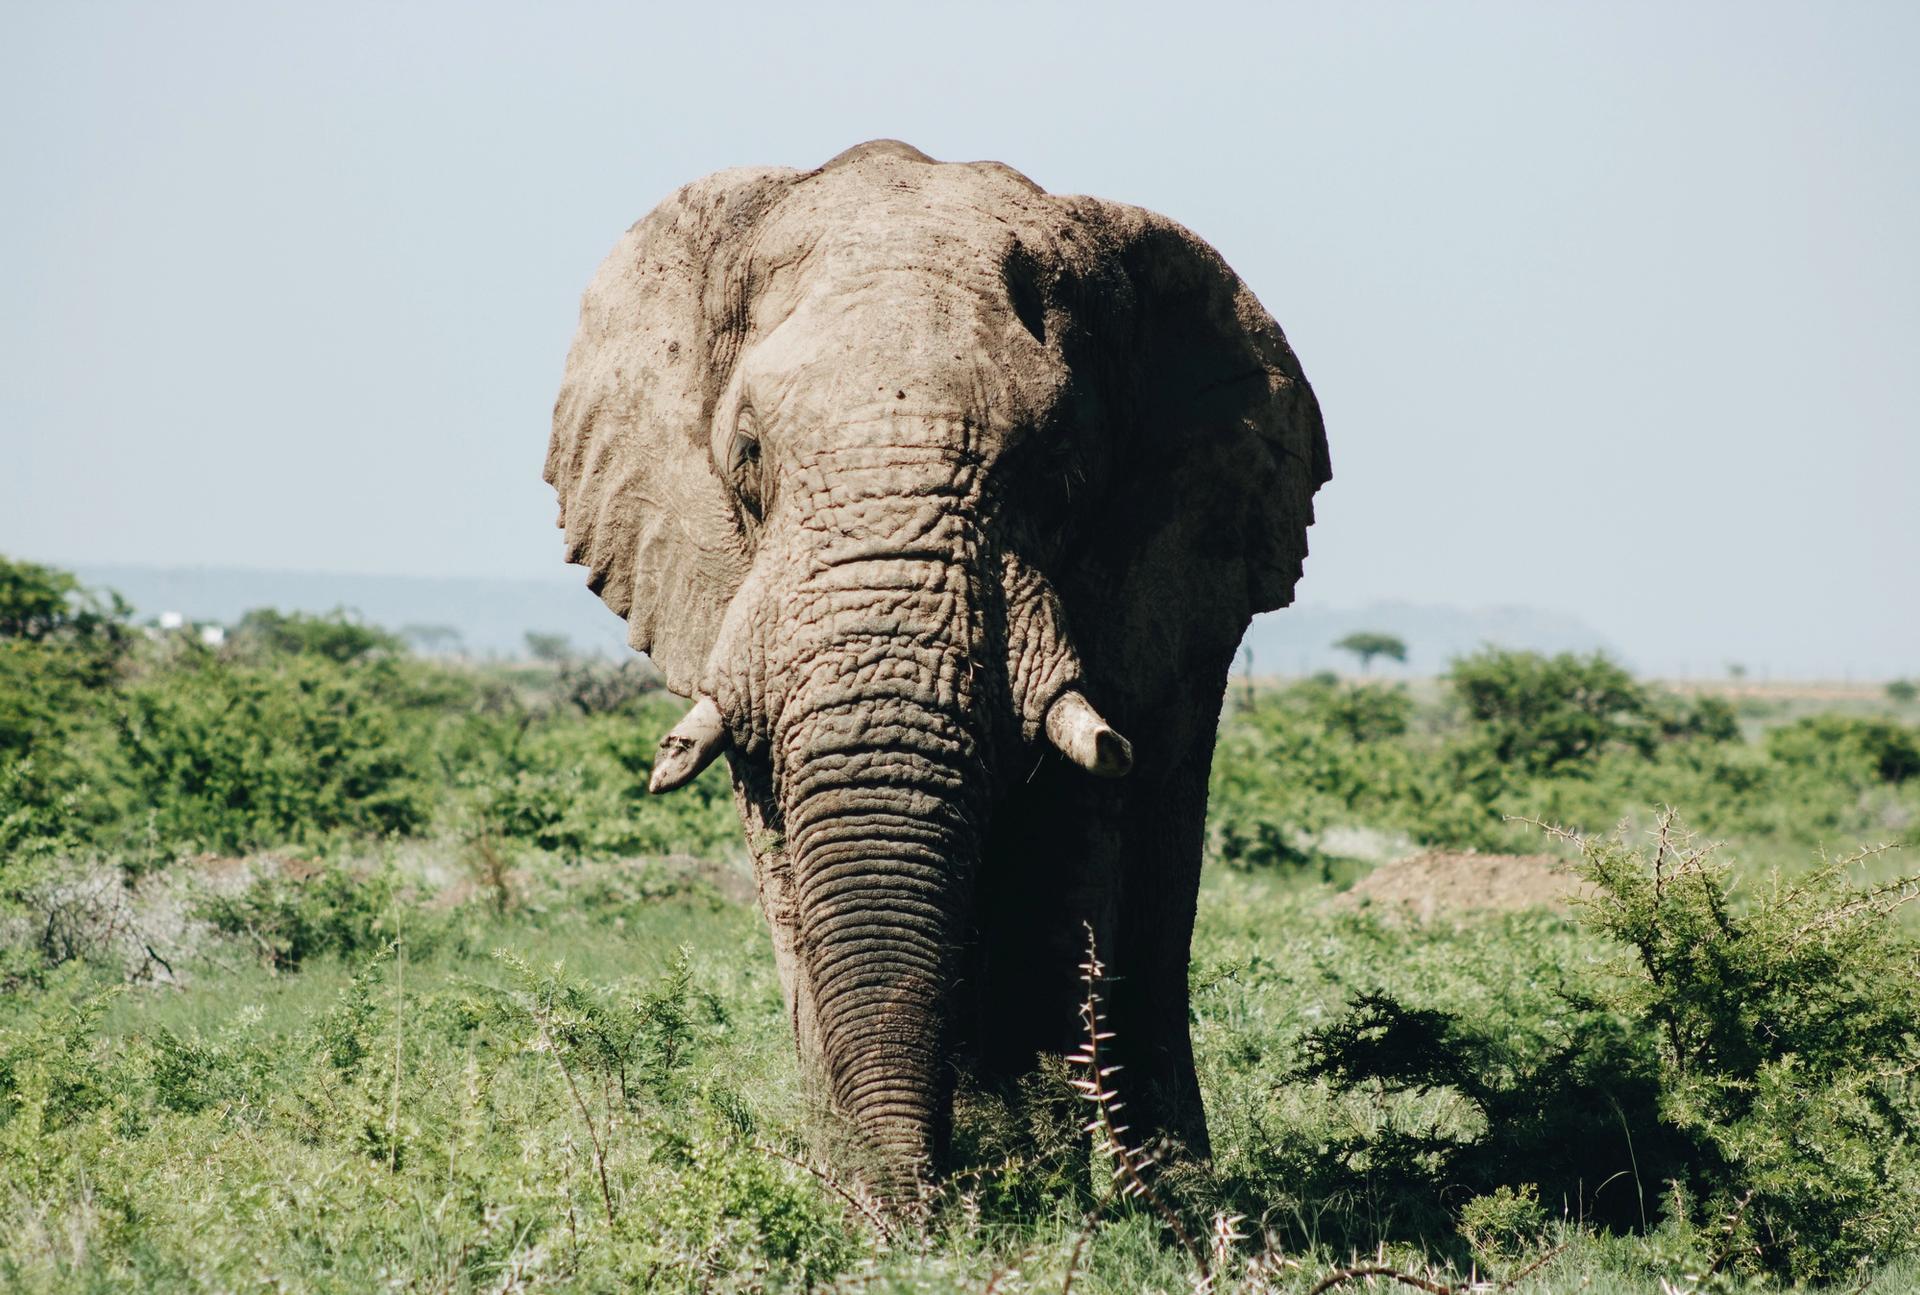 The UK is to impose tough new regulations on ivory sales Wade Lambert